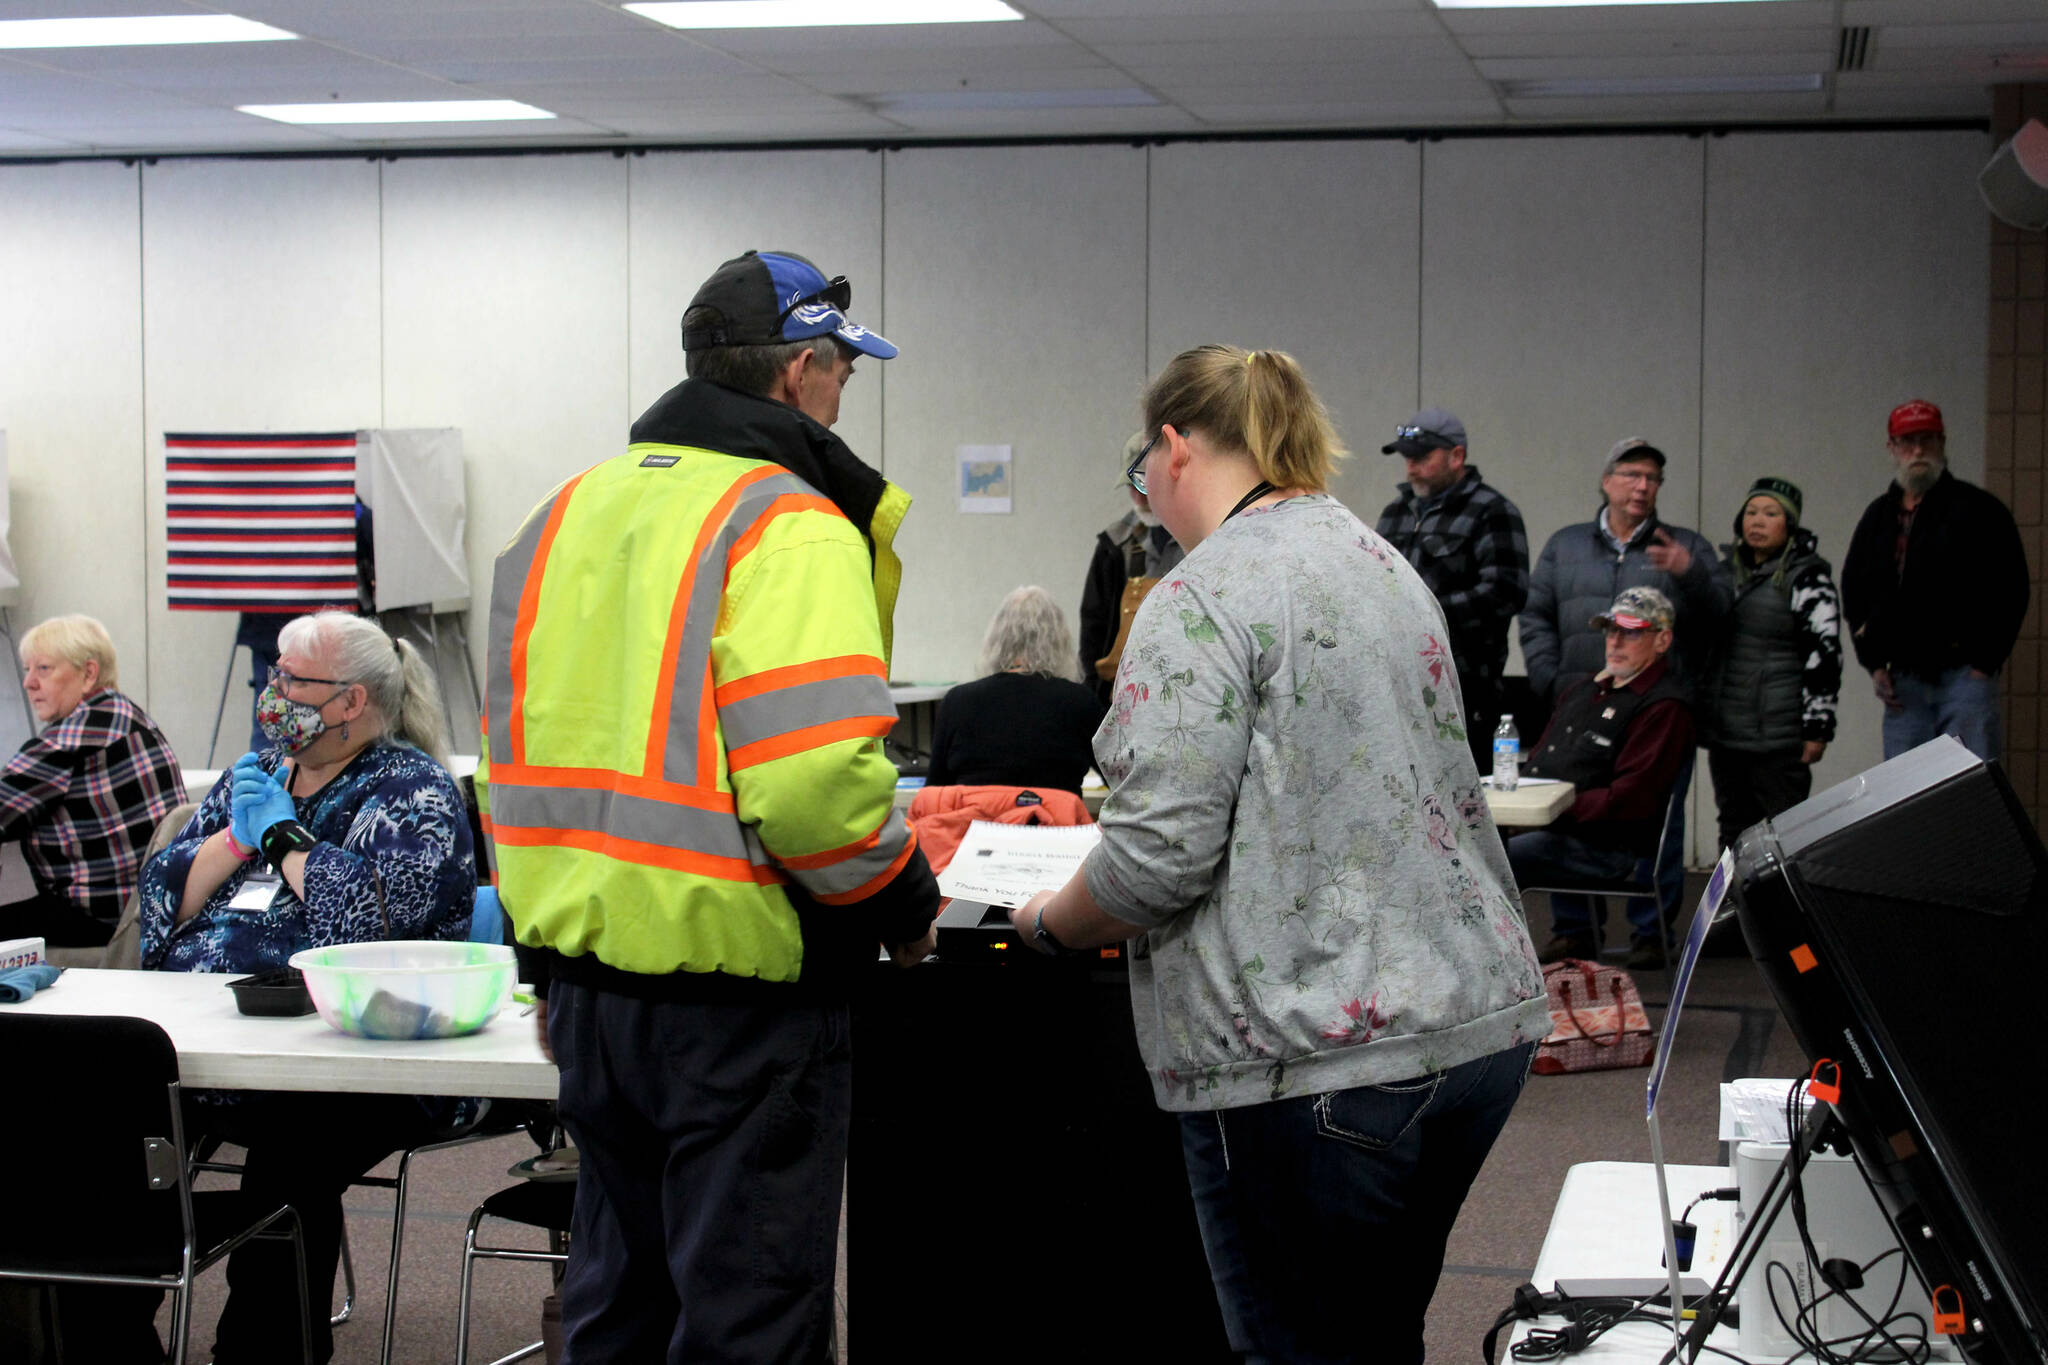 Poll worker Harmony Bolden (right) helps a voter cast their ballot at the Soldotna Regional Sports Complex on Tuesday, Nov. 8, 2022 in Soldotna, Alaska. (Ashlyn O’Hara/Peninsula Clarion)